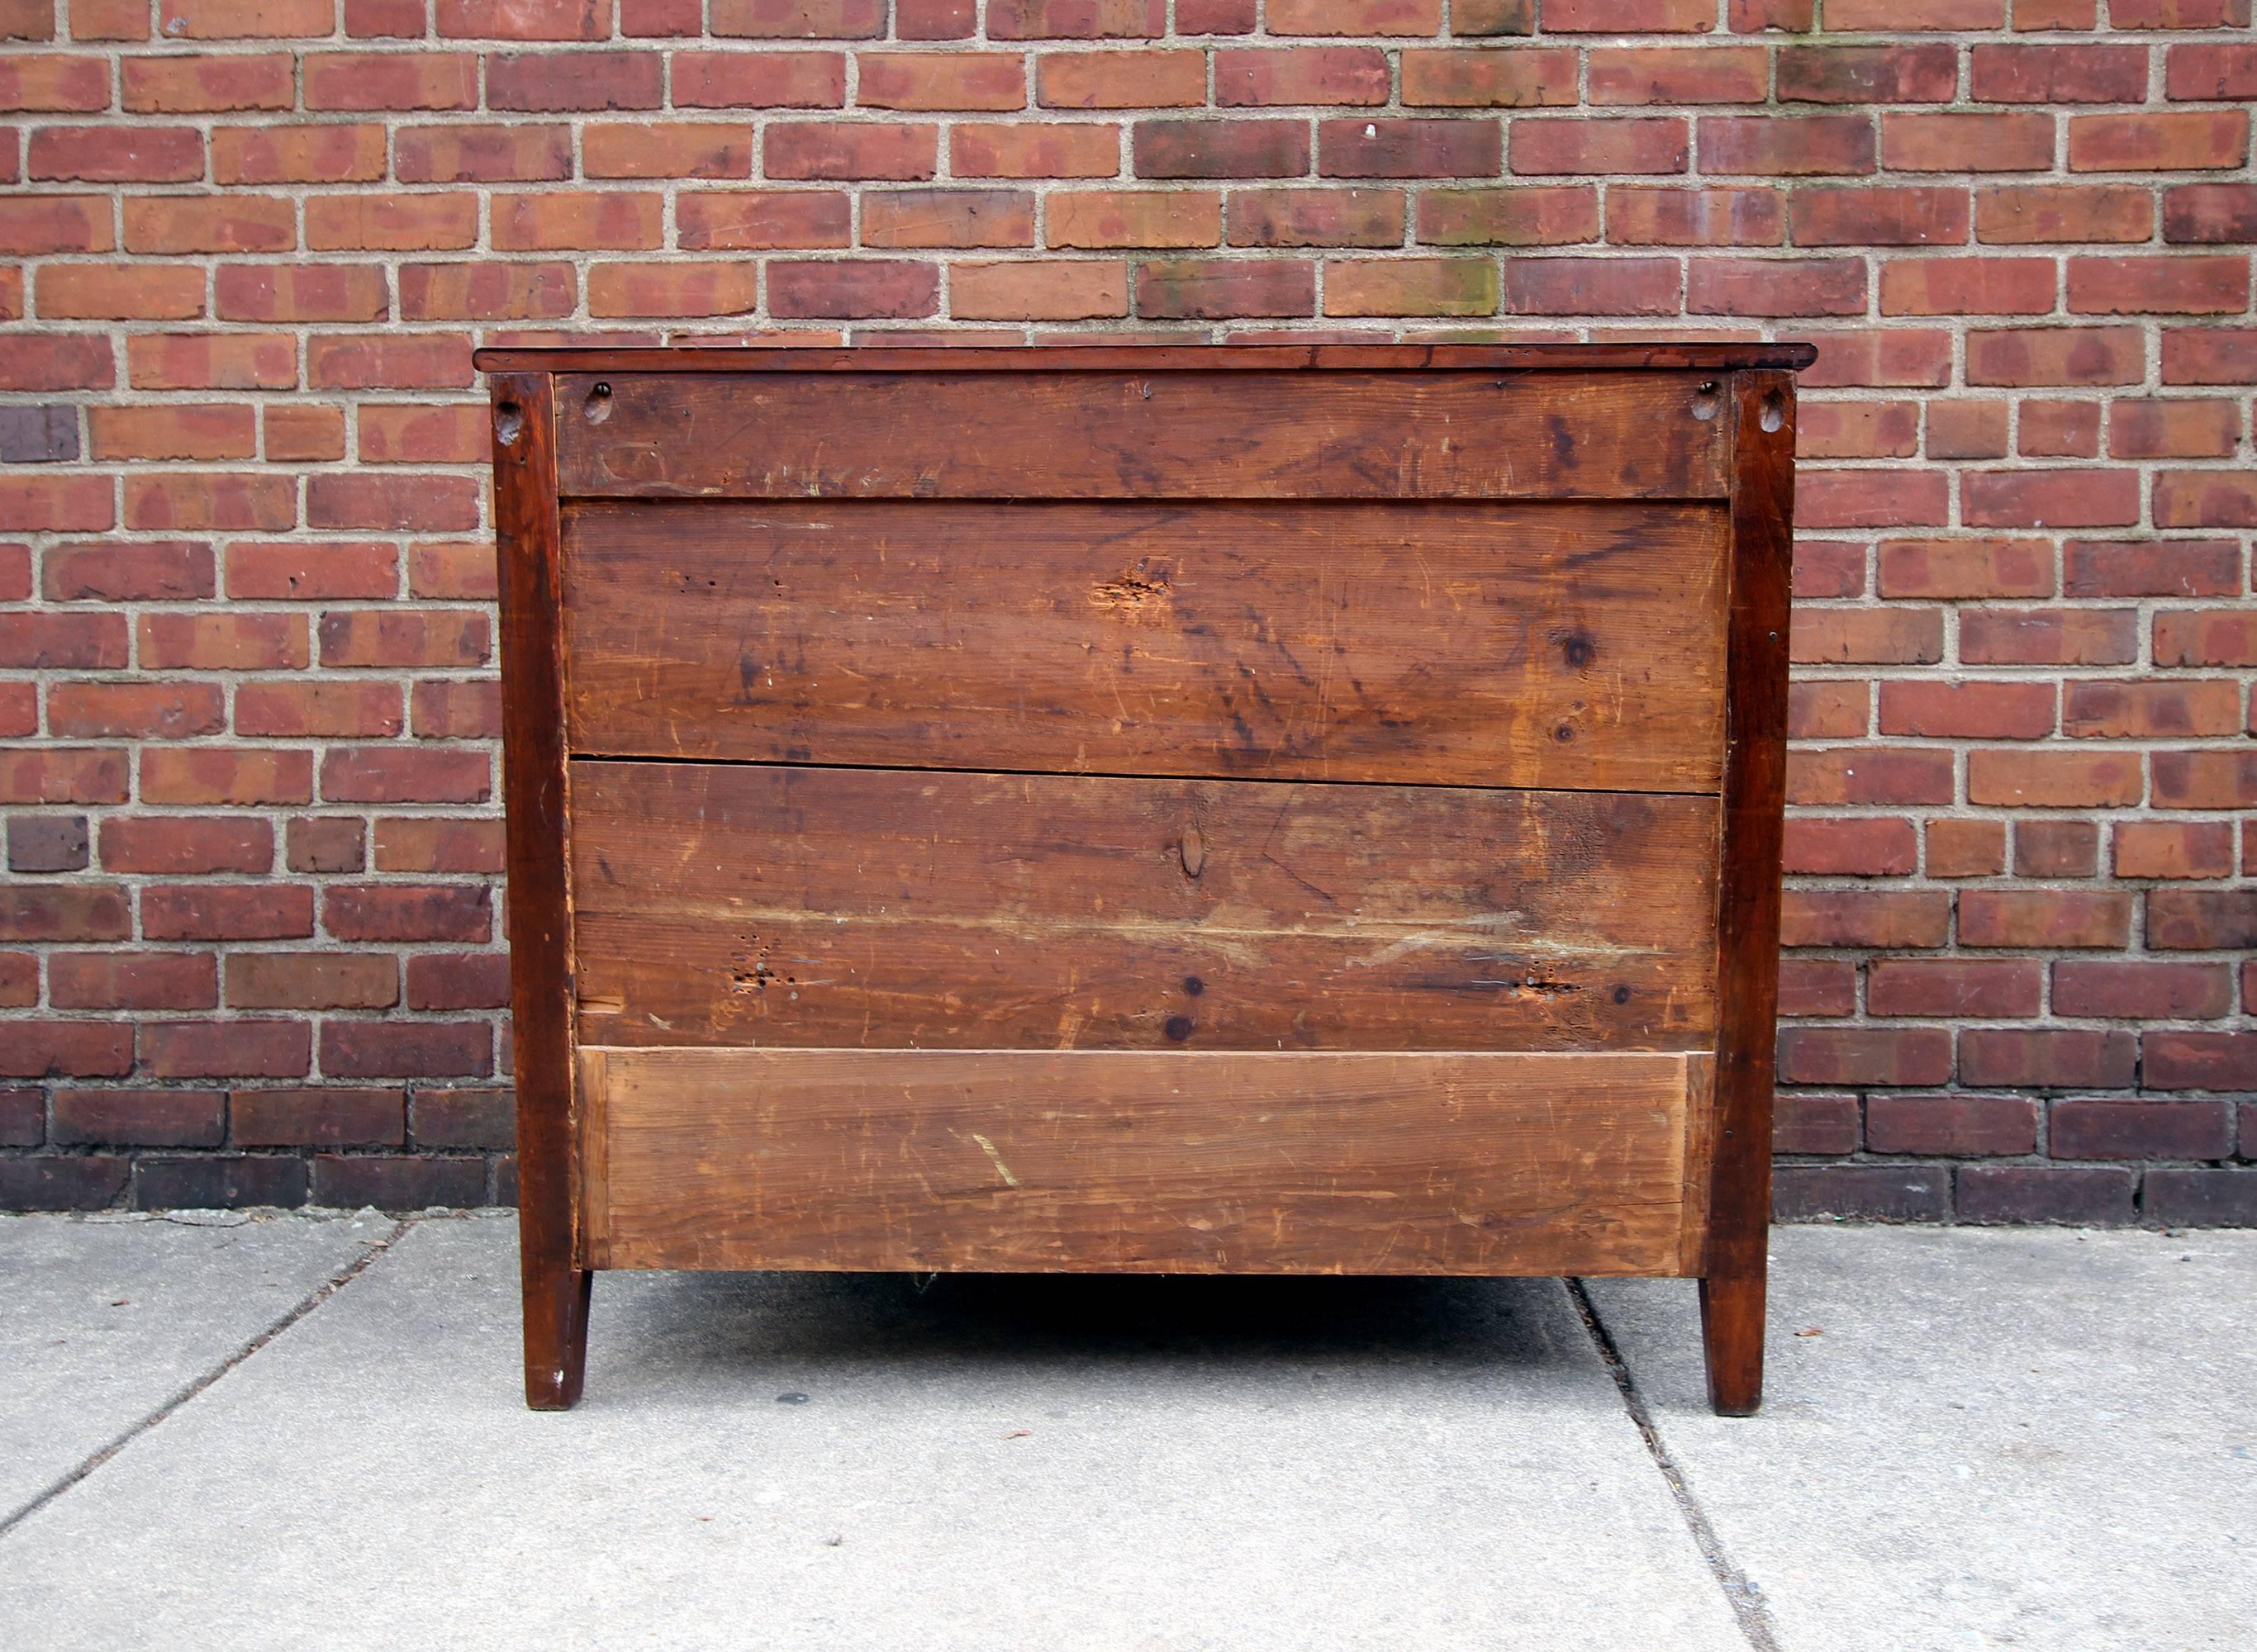 Maple and Mahogany Server or Chest with Bottle Drawers, 19th Century, American 4